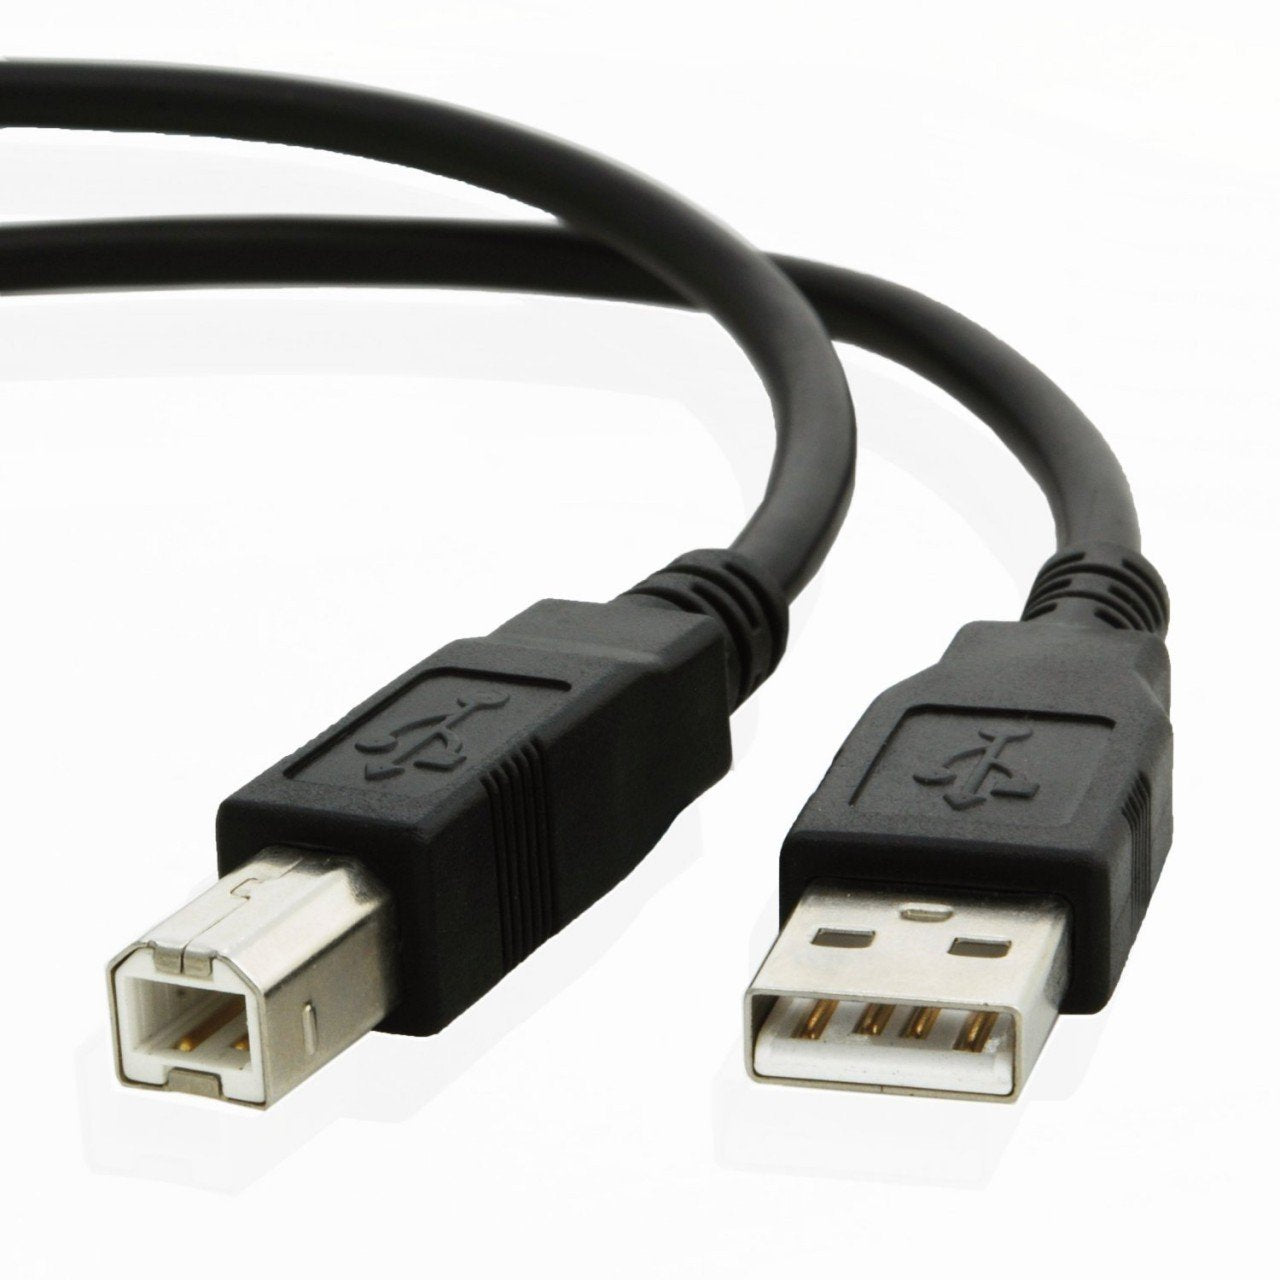 USB cable for Brother MFC-J5830DW